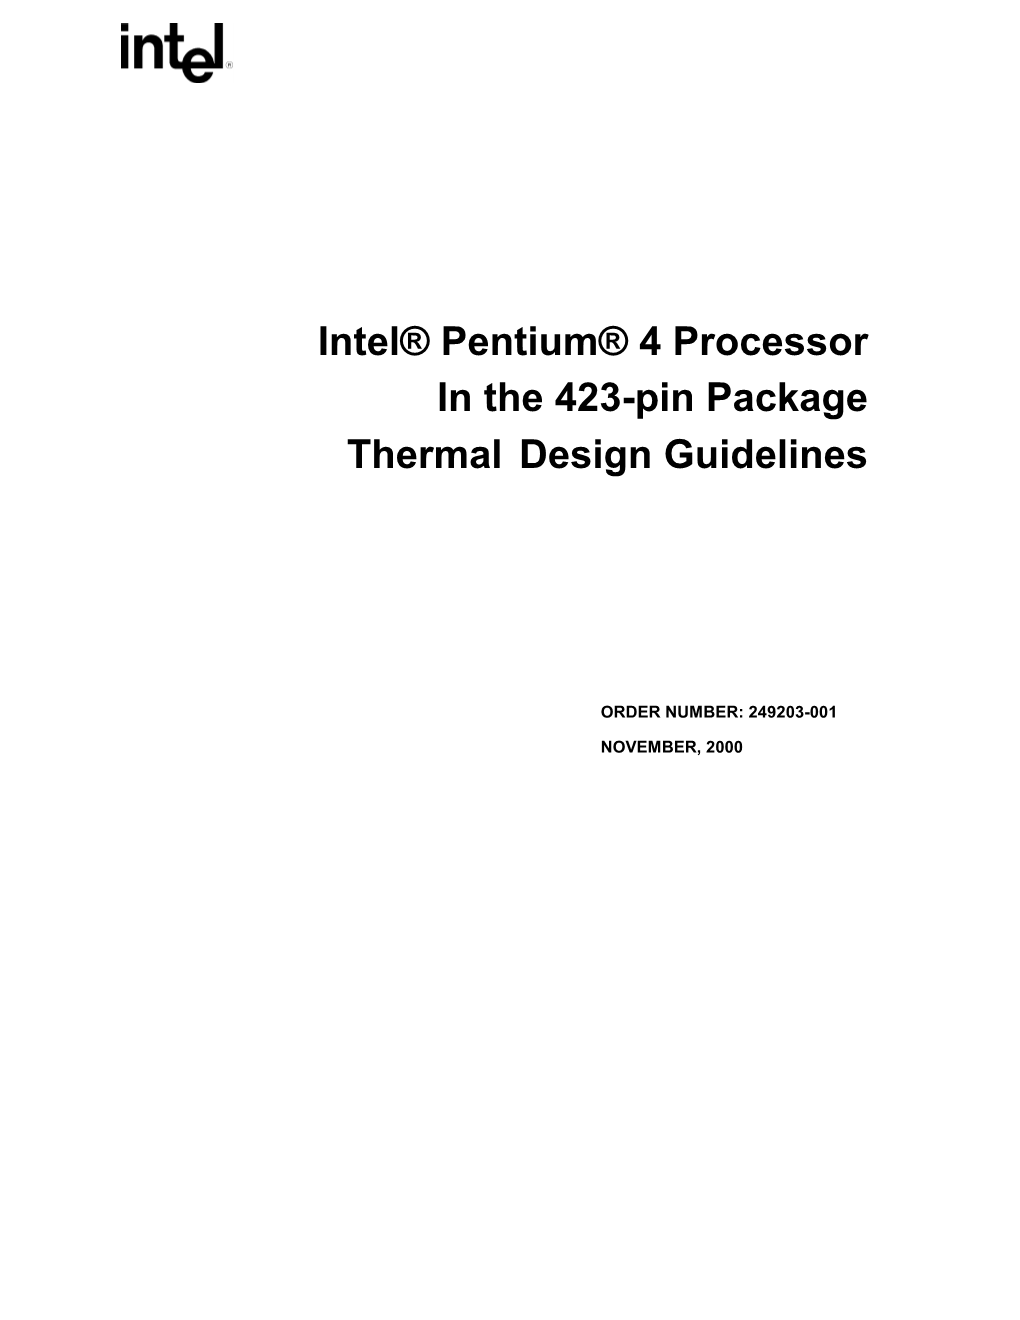 Intel® Pentium® 4 Processor in the 423-Pin Package Thermal Design Guidelines